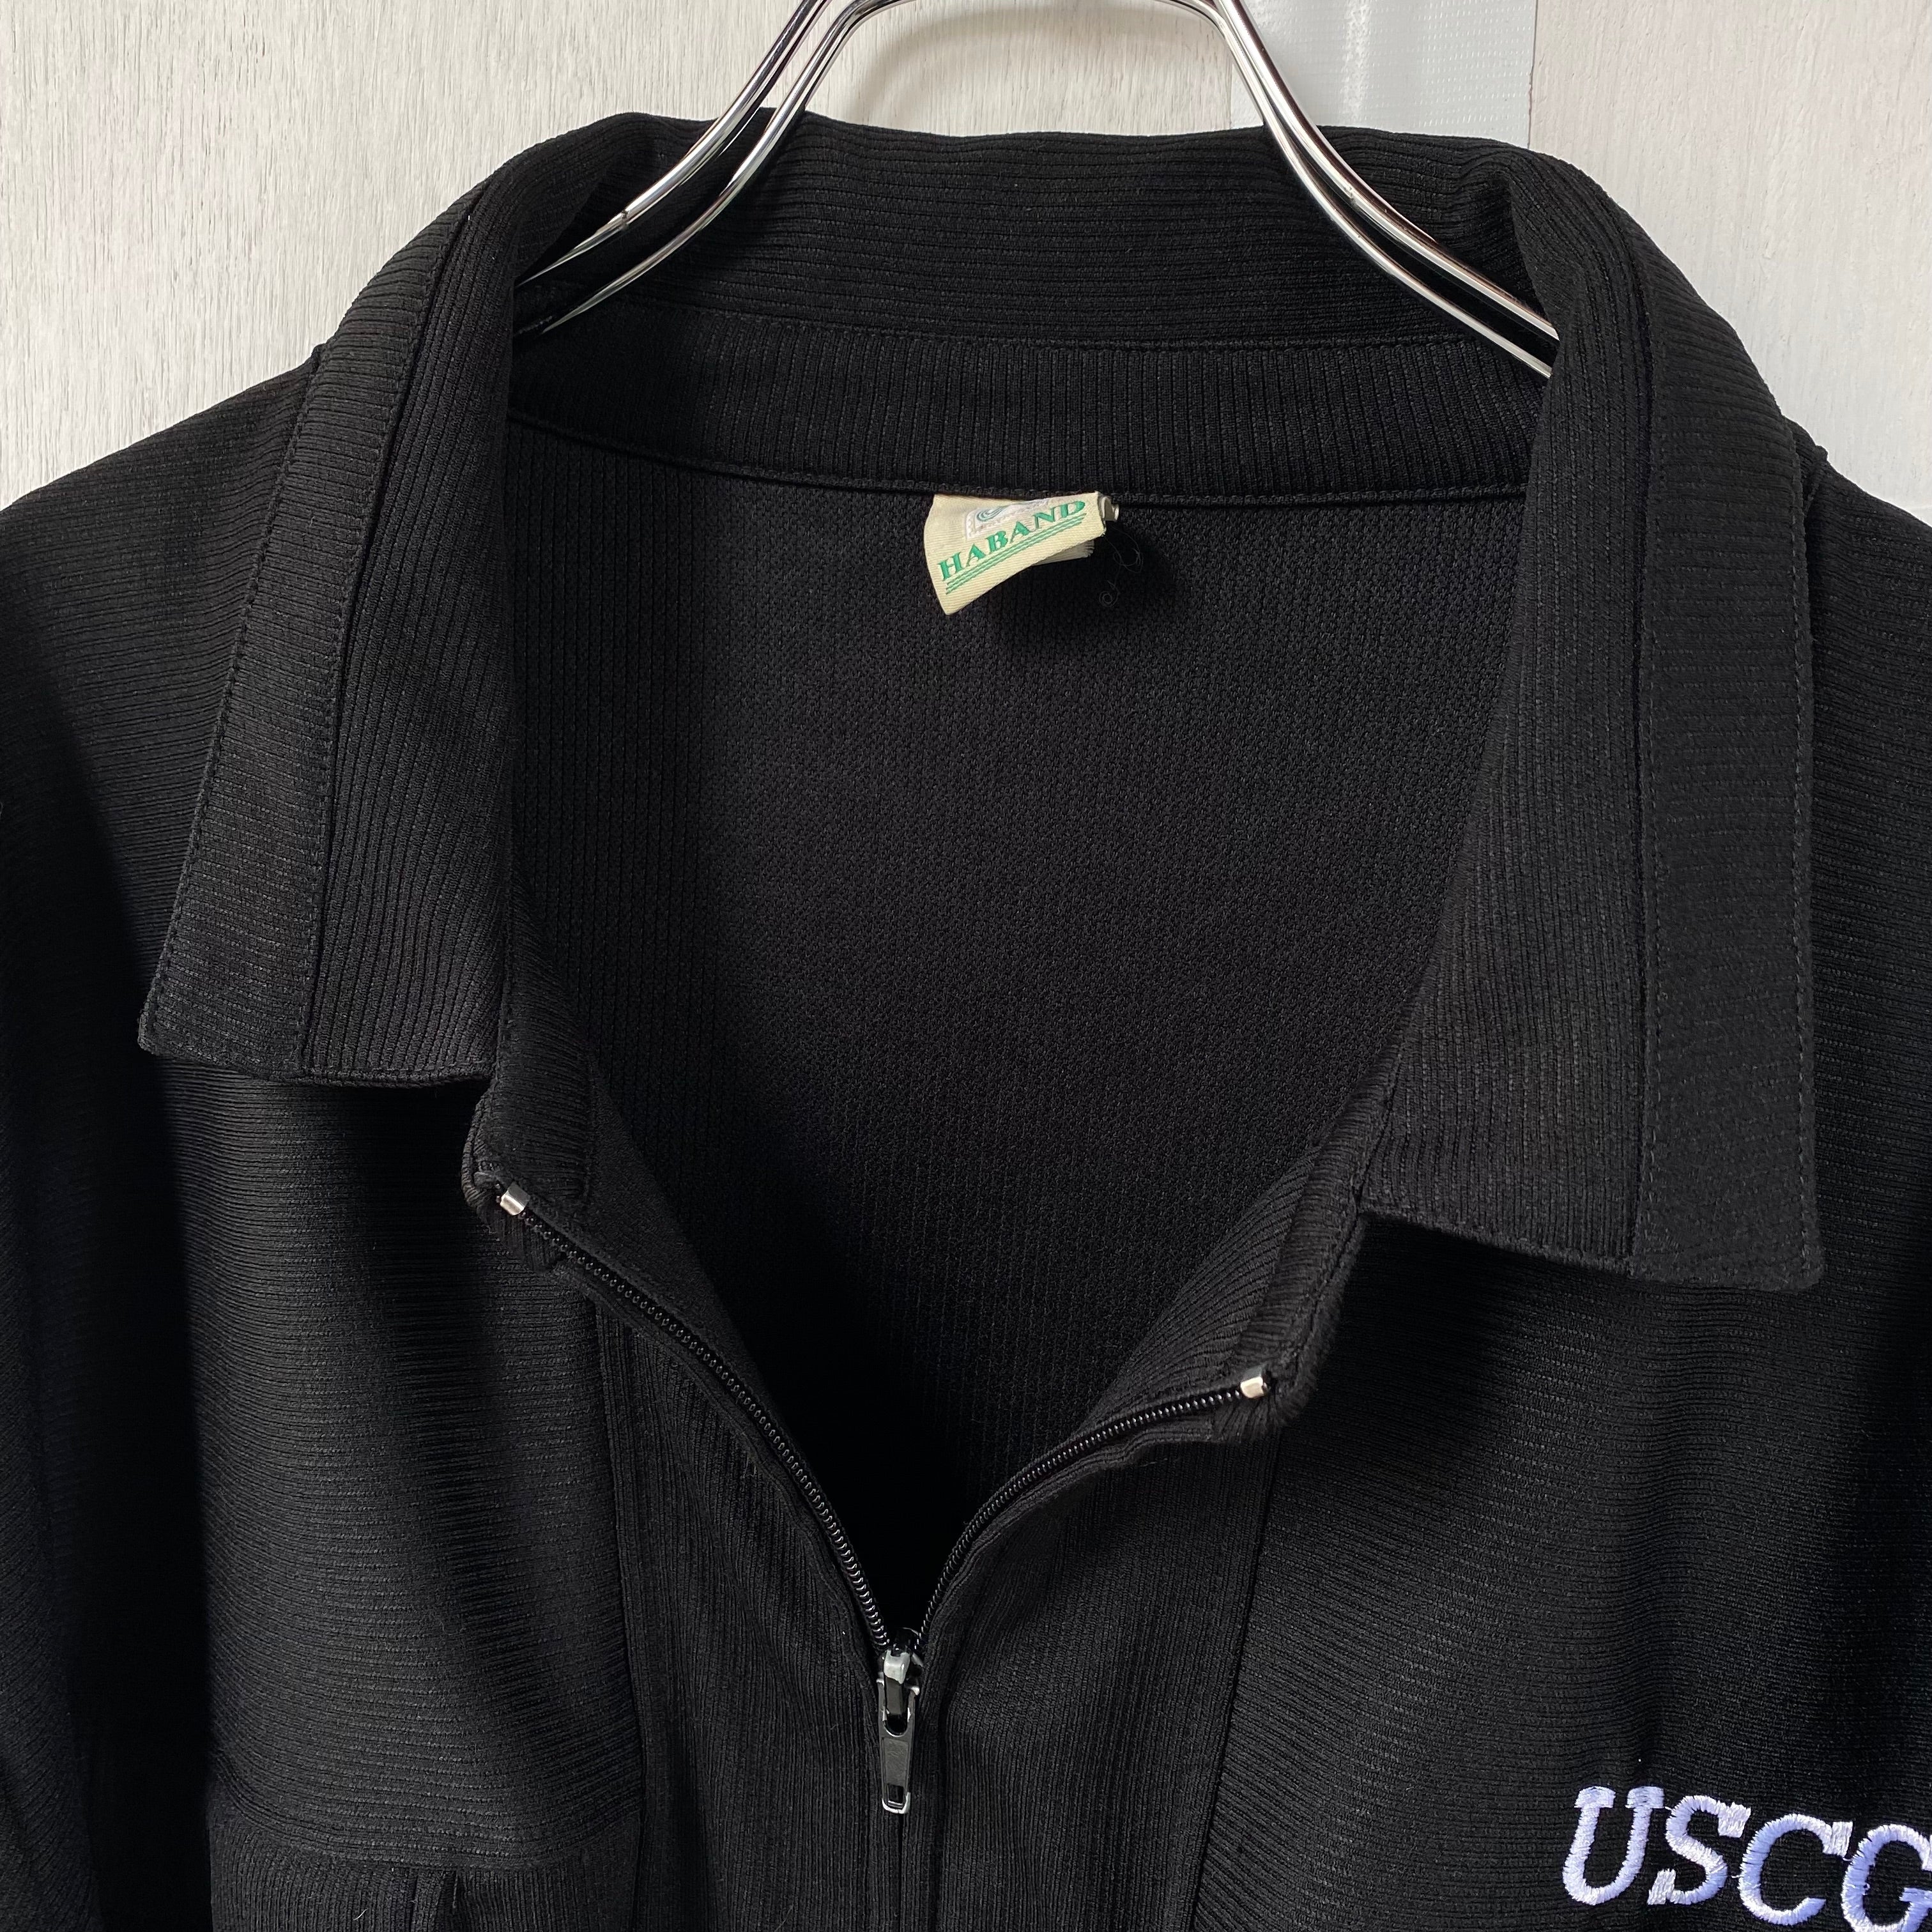 [ ONLY ONE 1 ] U.S.C.G. LIGHT WEIGHT ATHLETIC JACKET / U.S.MILITARY